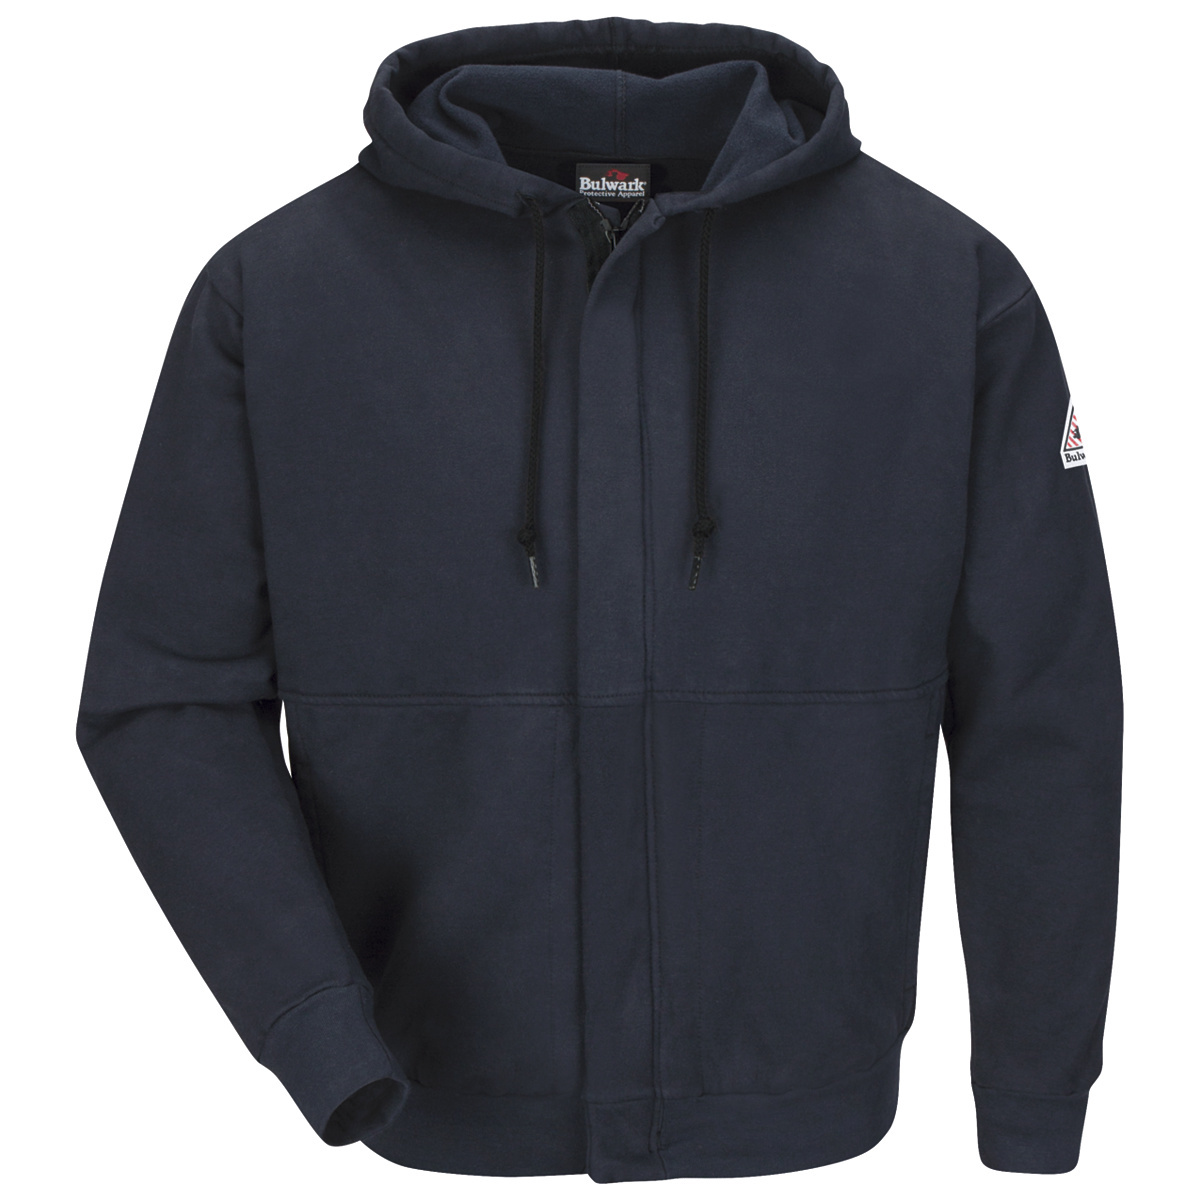 Bulwark® 4X Tall Navy Blue Cotton/Spandex Brushed Fleece Flame Resistant Hooded Sweatshirt With Zipper Front Closure